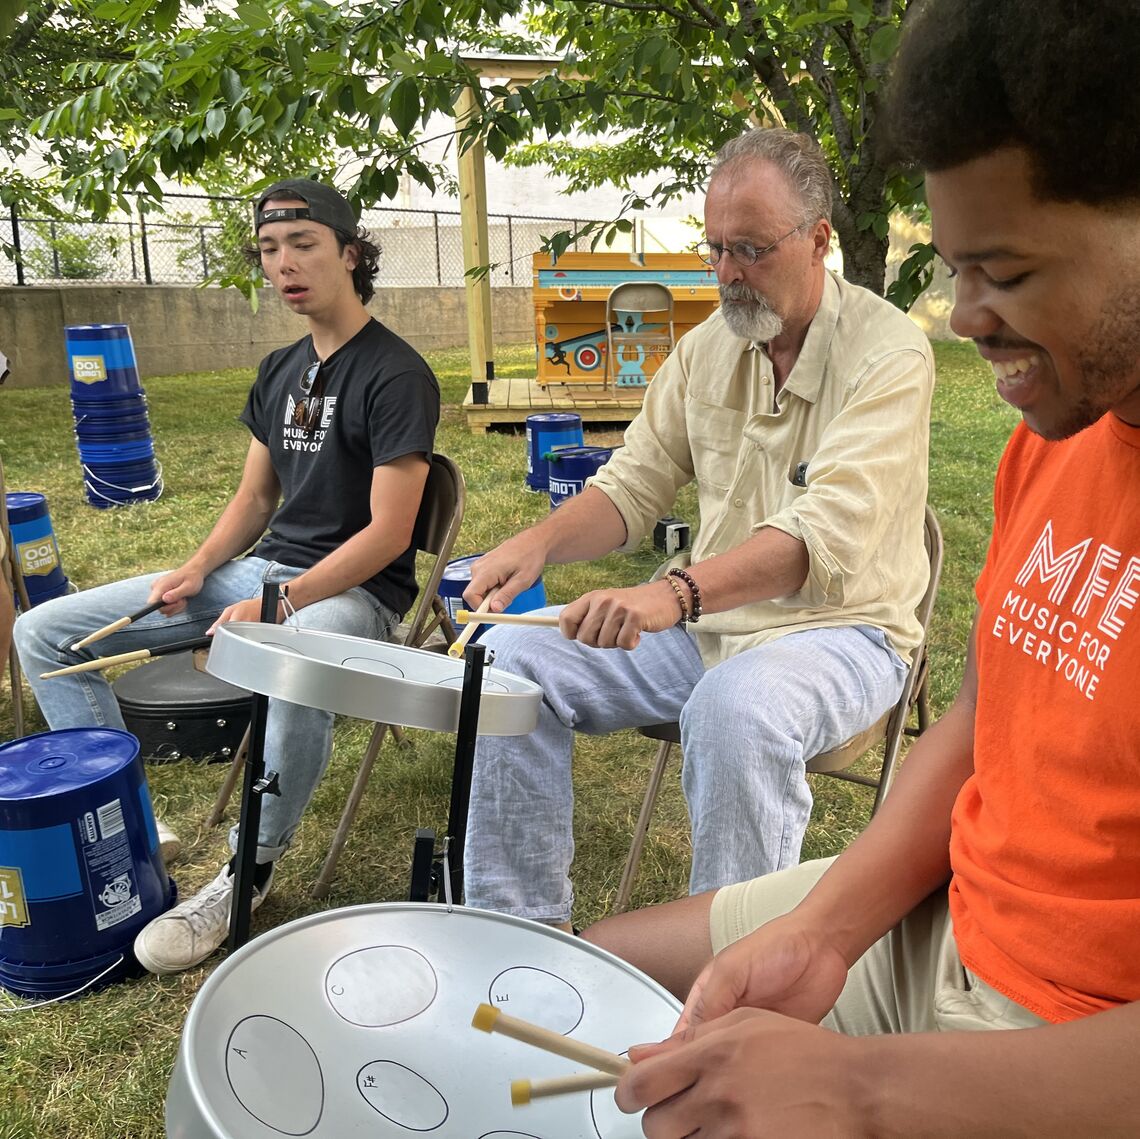 Reece Chang '24 (left) helps coordinate activities for Lancaster nonprofit Music for Everyone's annual "Make Music Day."